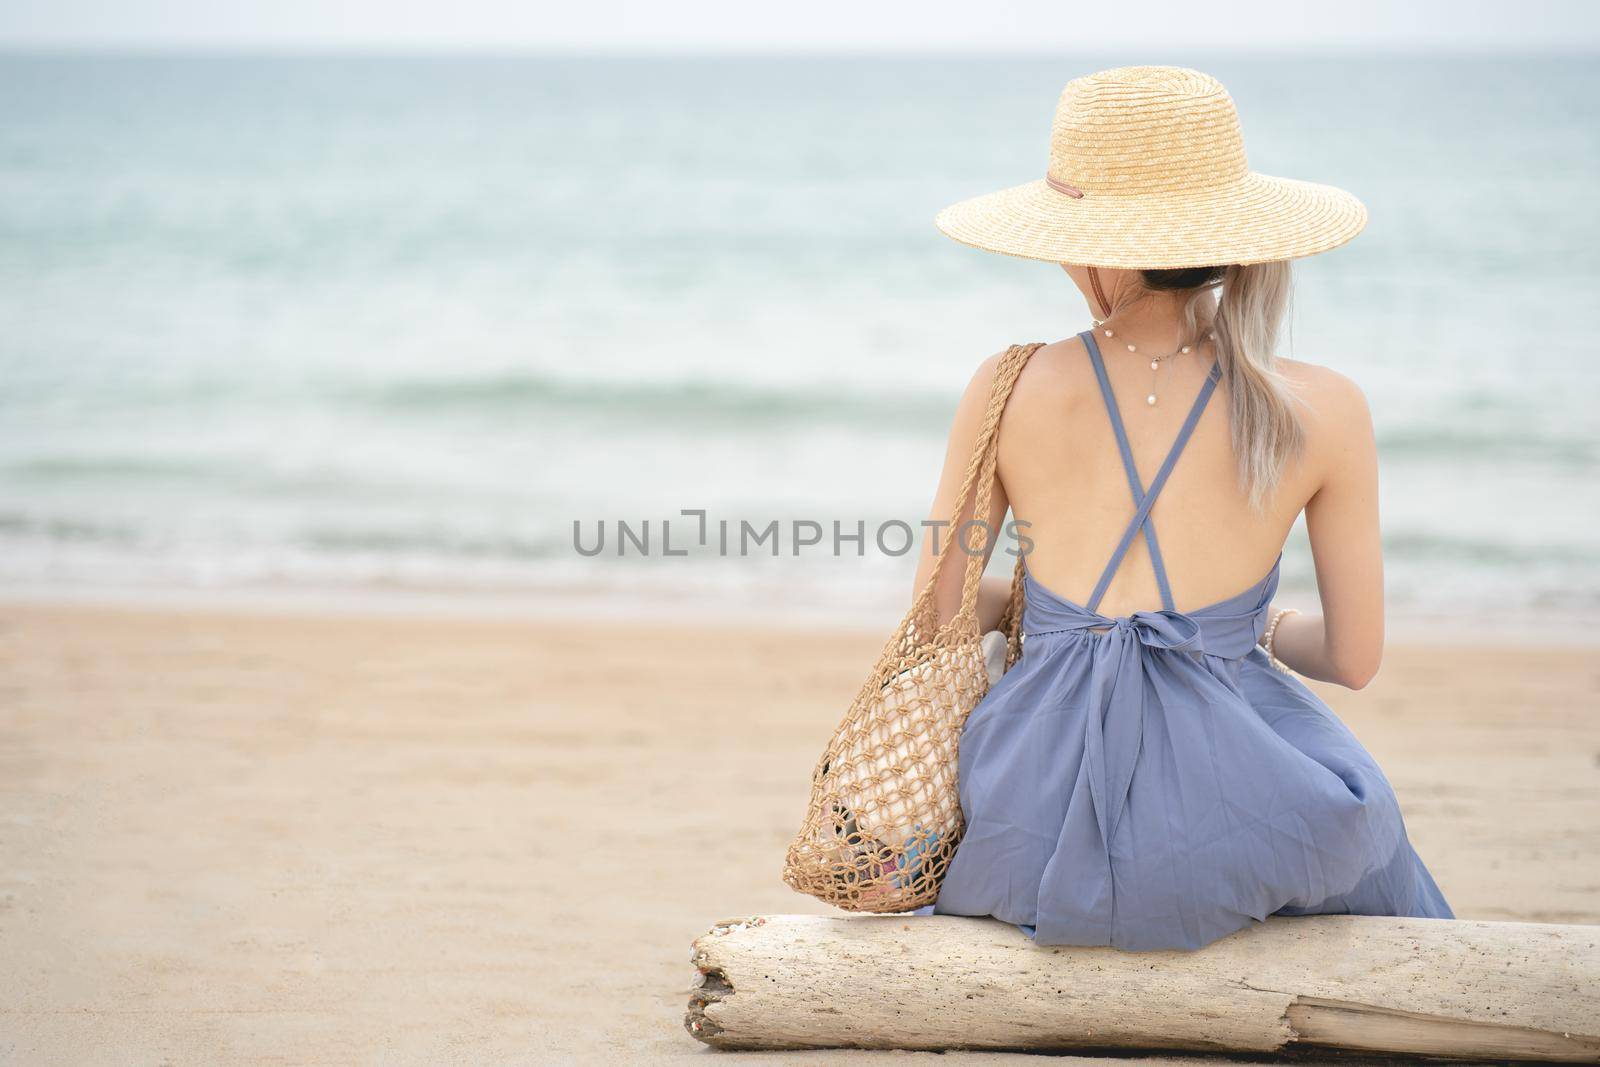 Woman in blue dress and straw hat, sitting on a timber by the ocean. by sirawit99